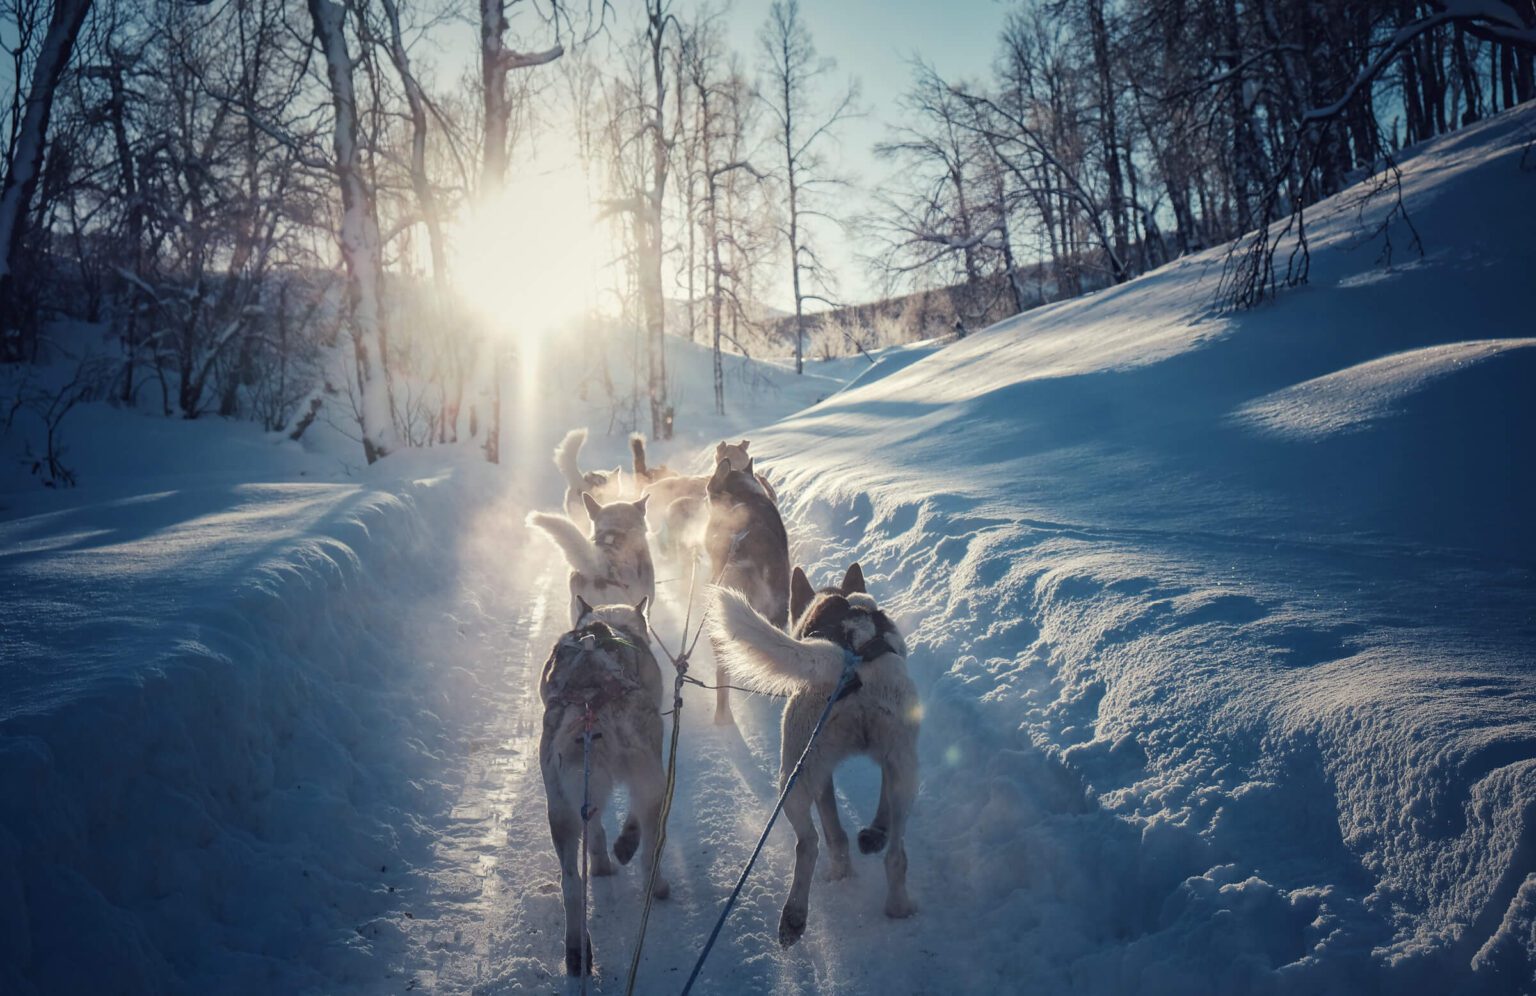 Dog sledding in the winter with sunshine